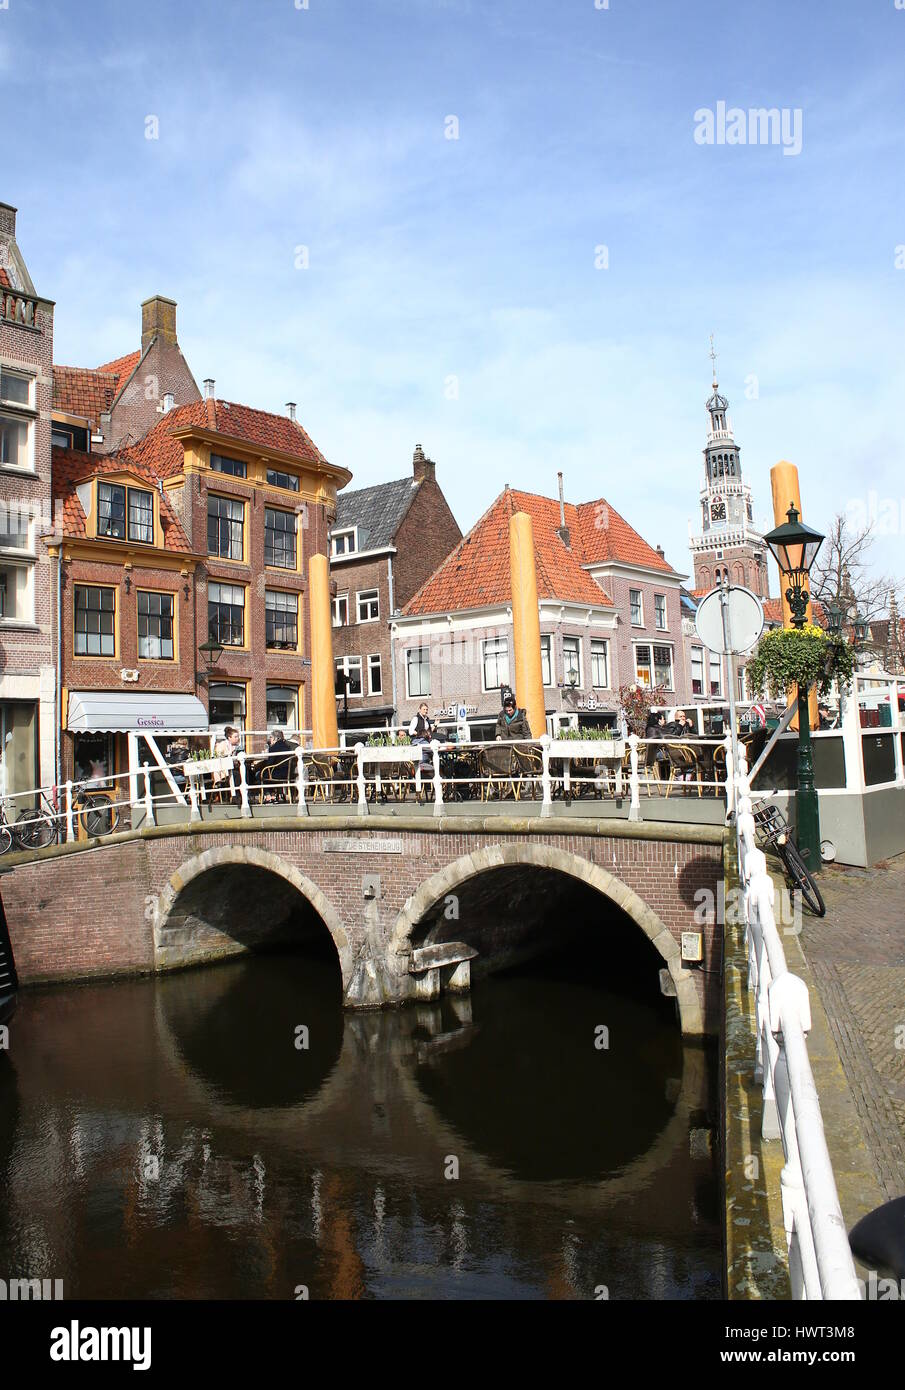 Old stone bridge over Mient canal, canal, central Alkmaar, Netherlands Stock Photo